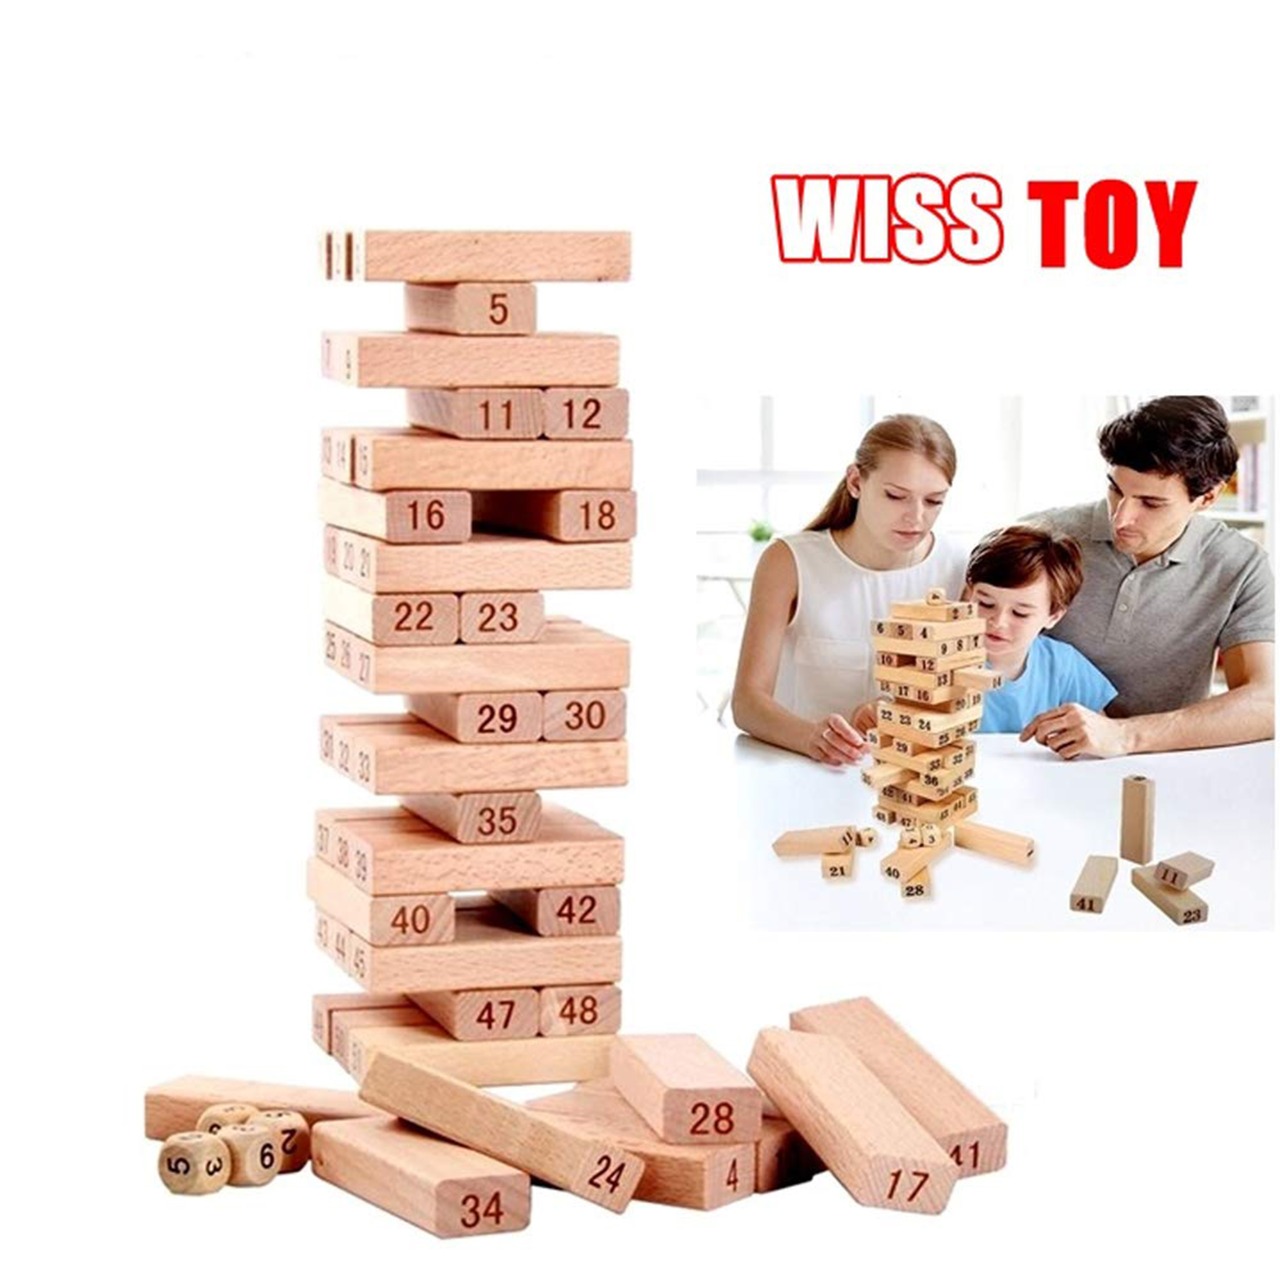 54 Wood Pieces Wiss Toy Wooden Blocks 